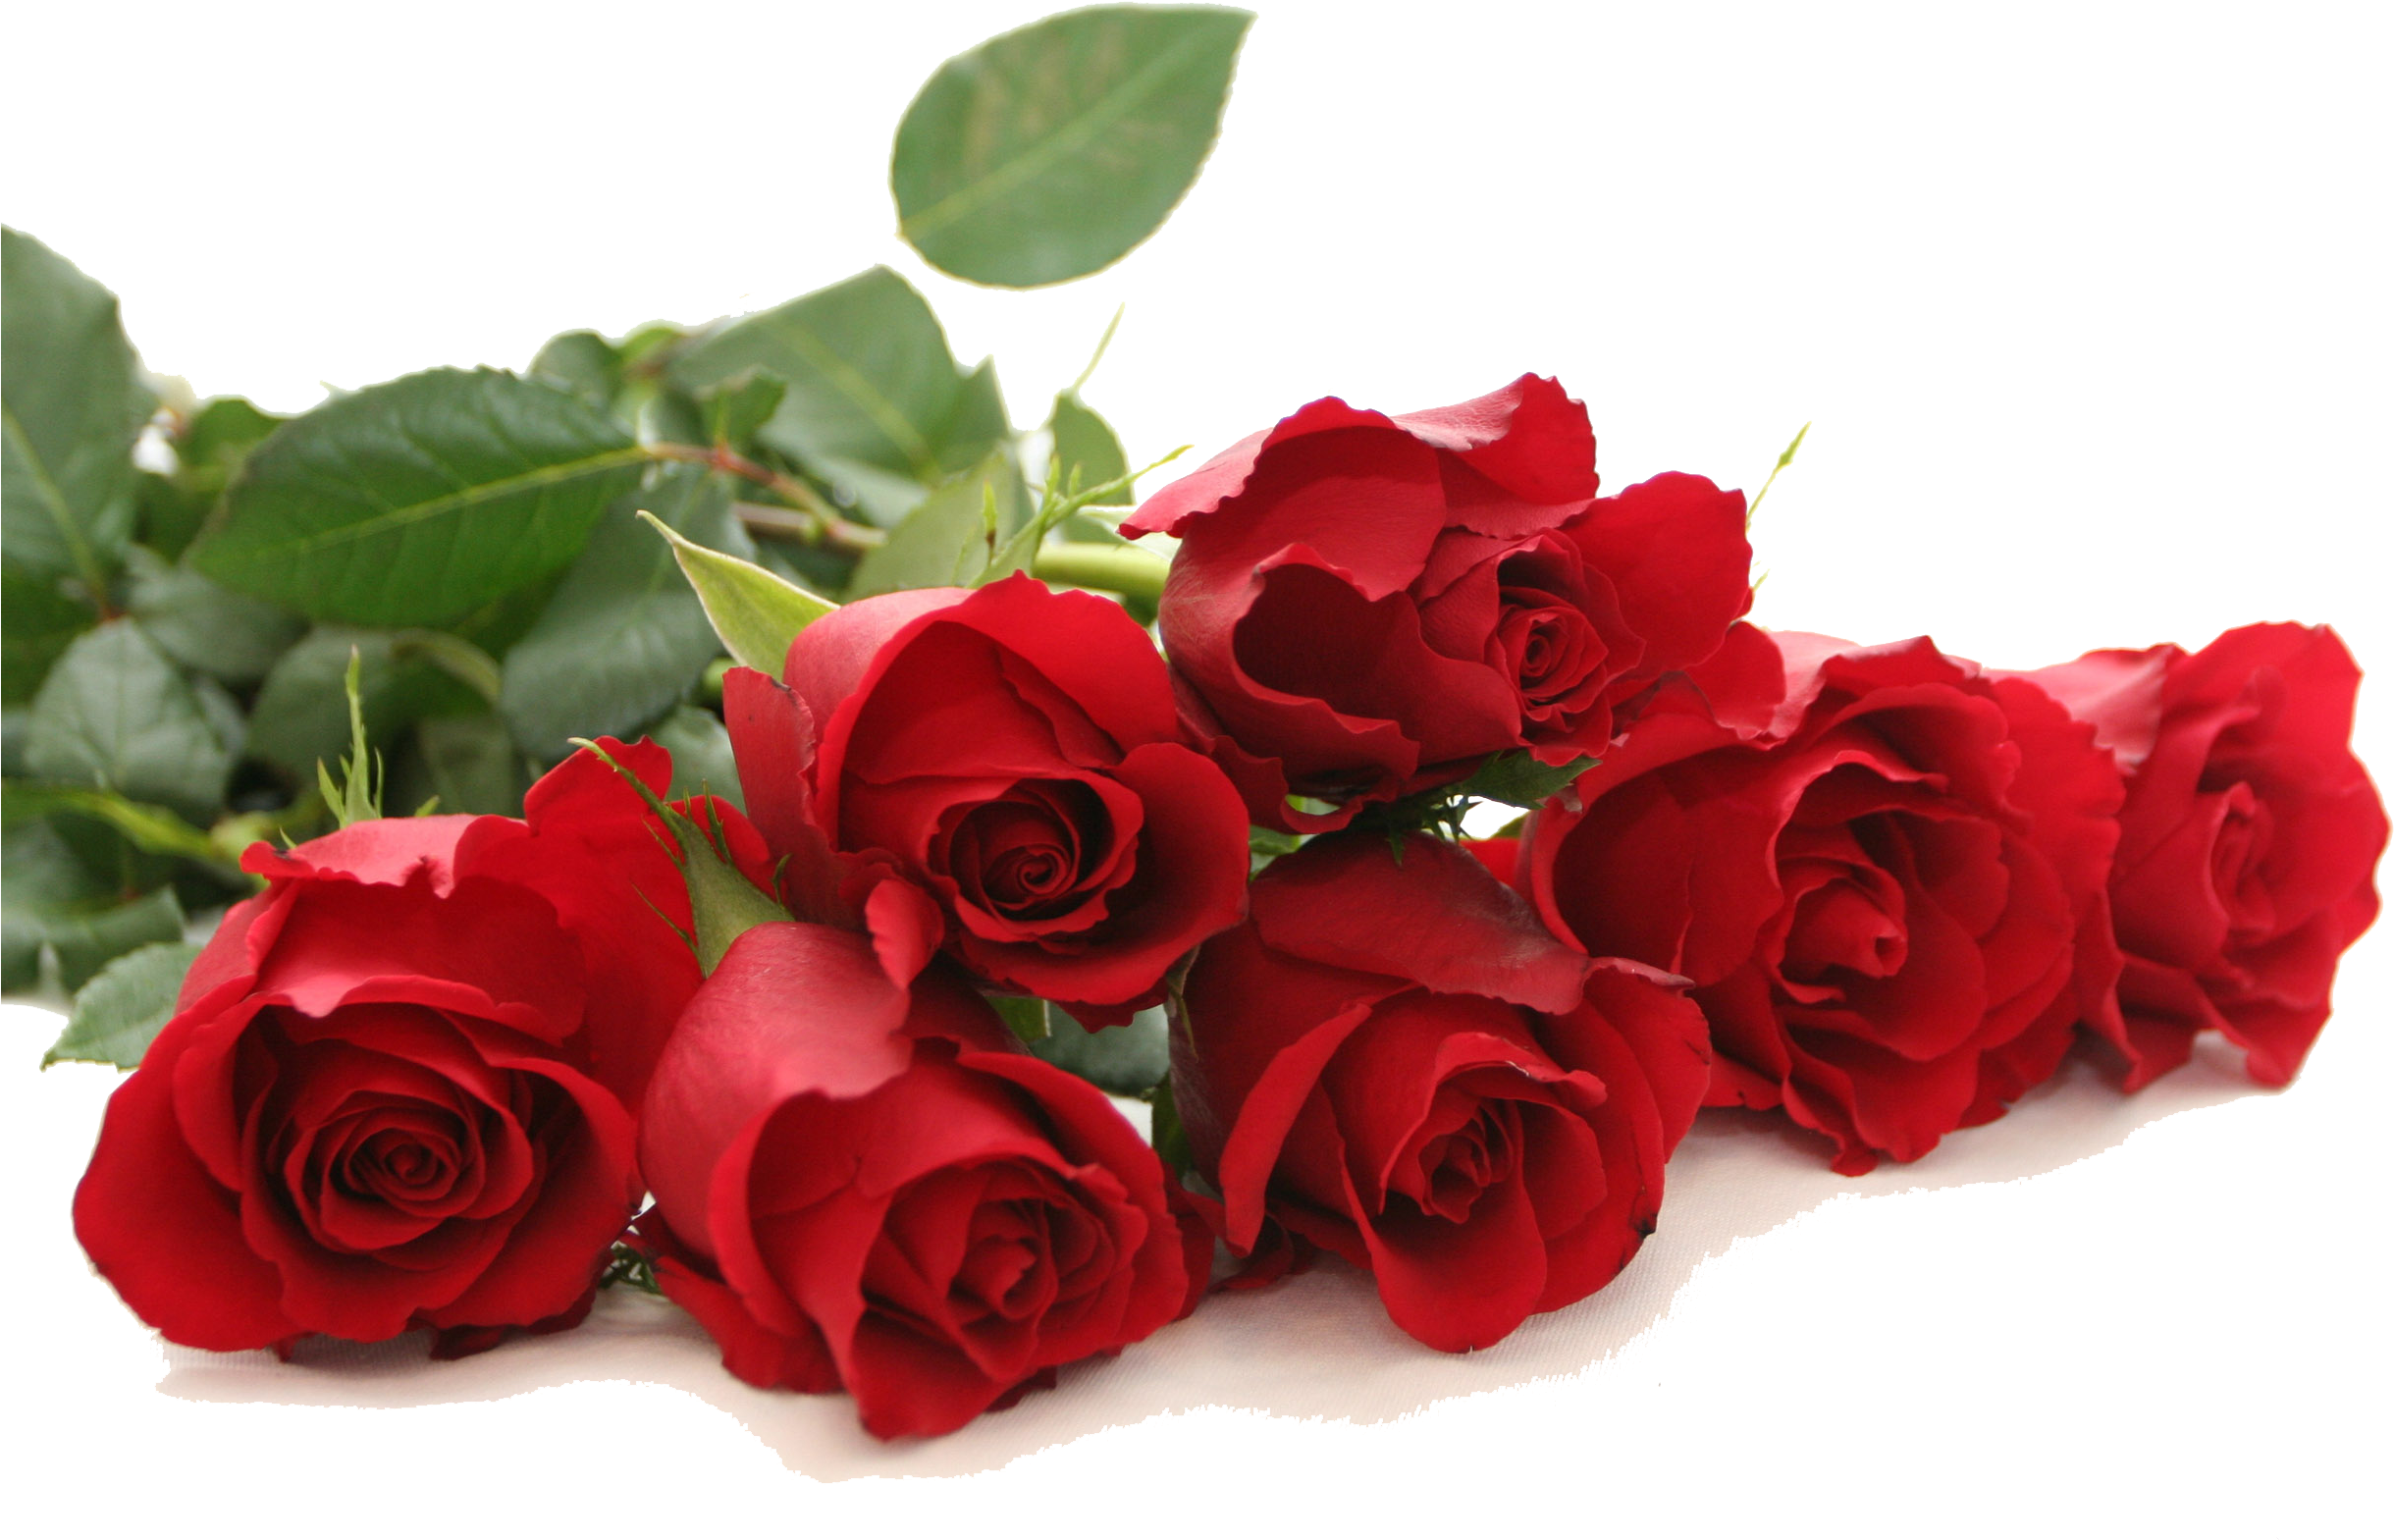 Image - Red Roses Good Morning (2560x1600)